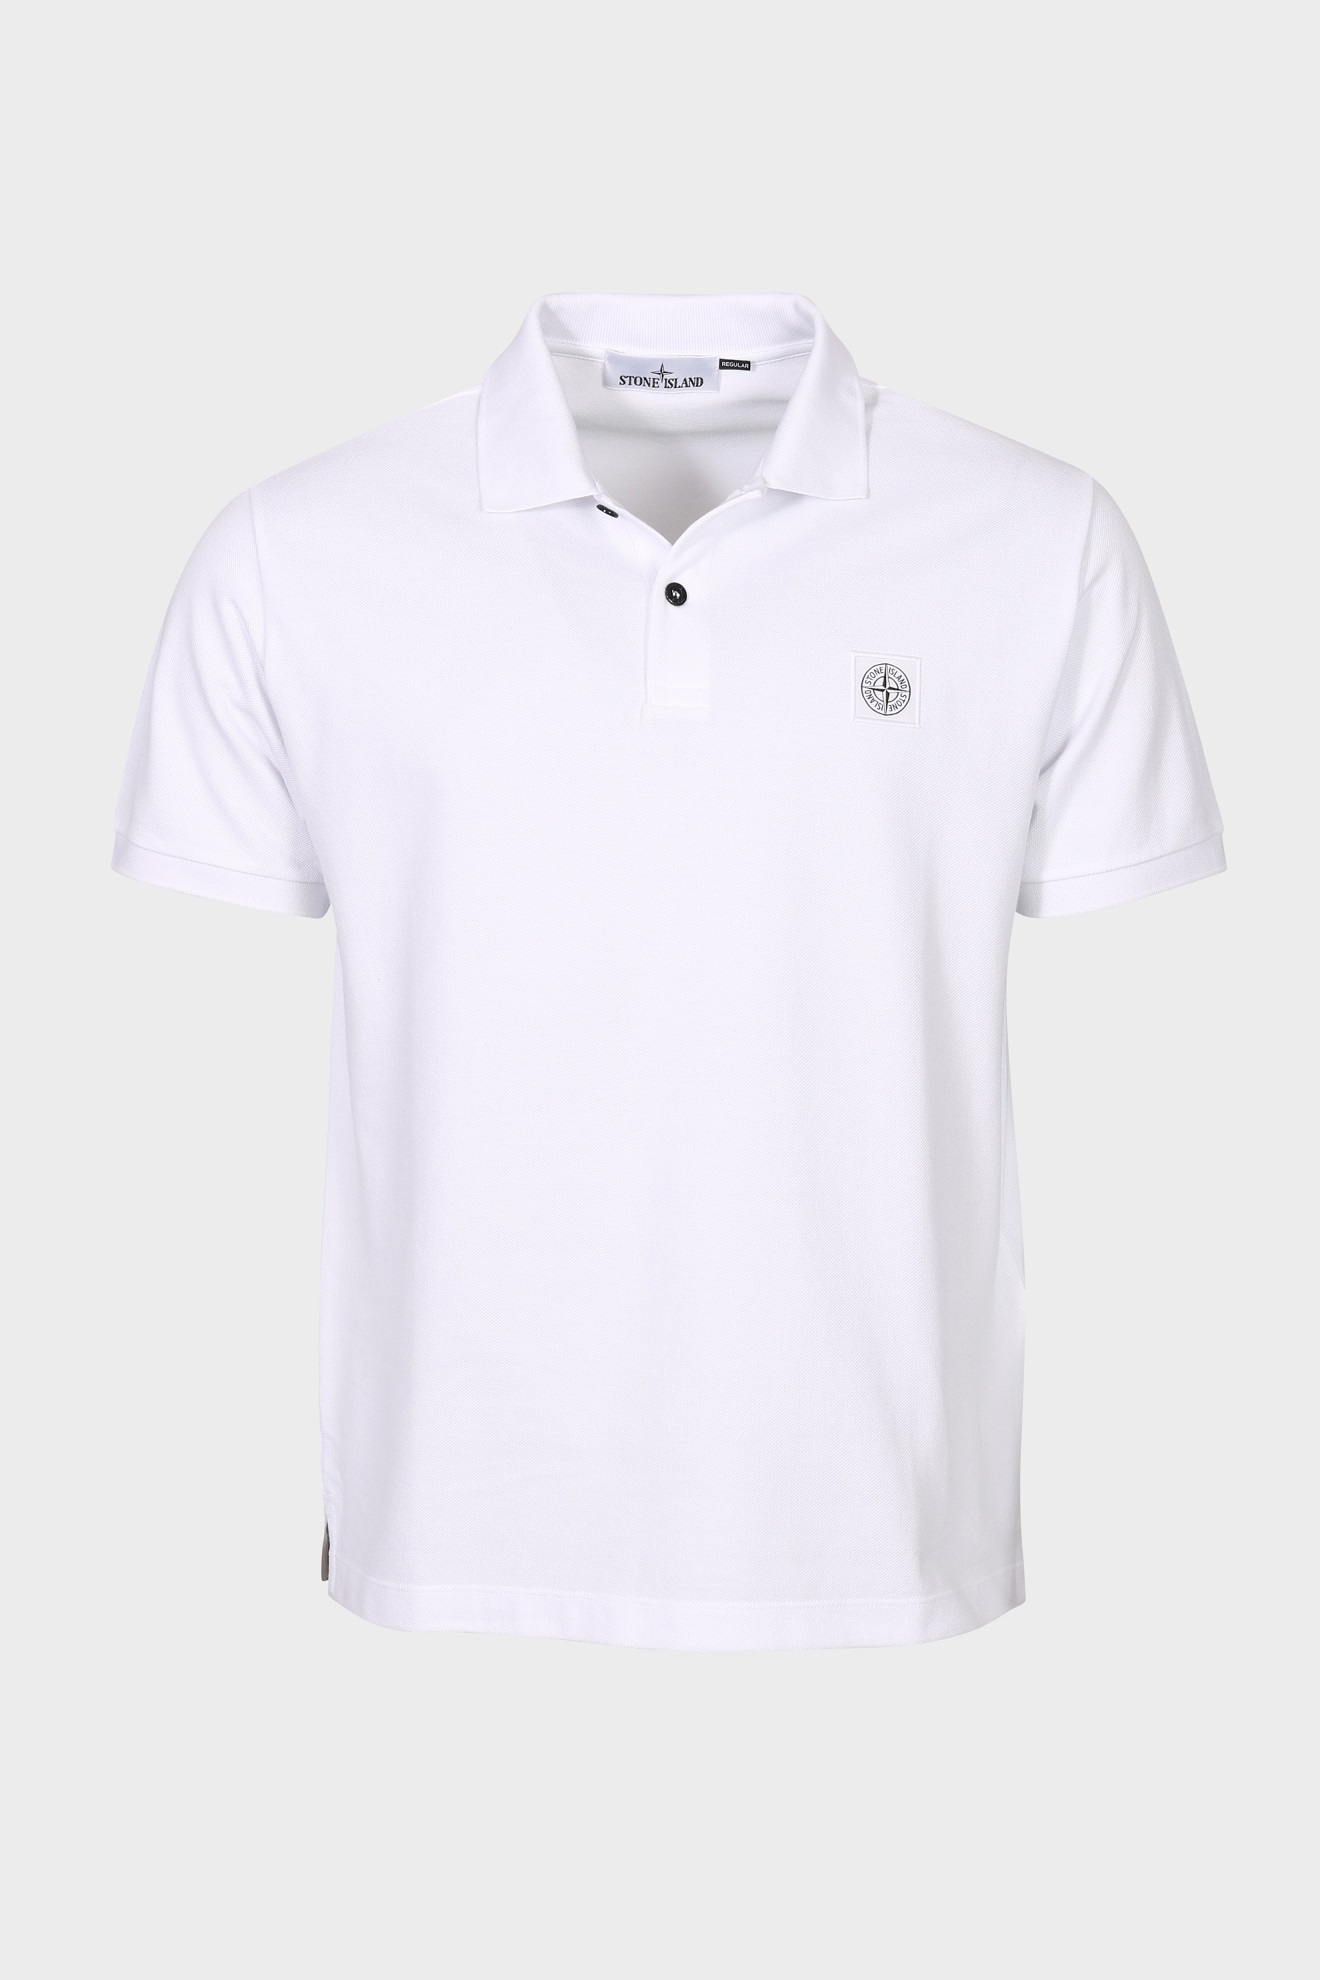 STONE ISLAND Regular Fit Polo Shirt in White